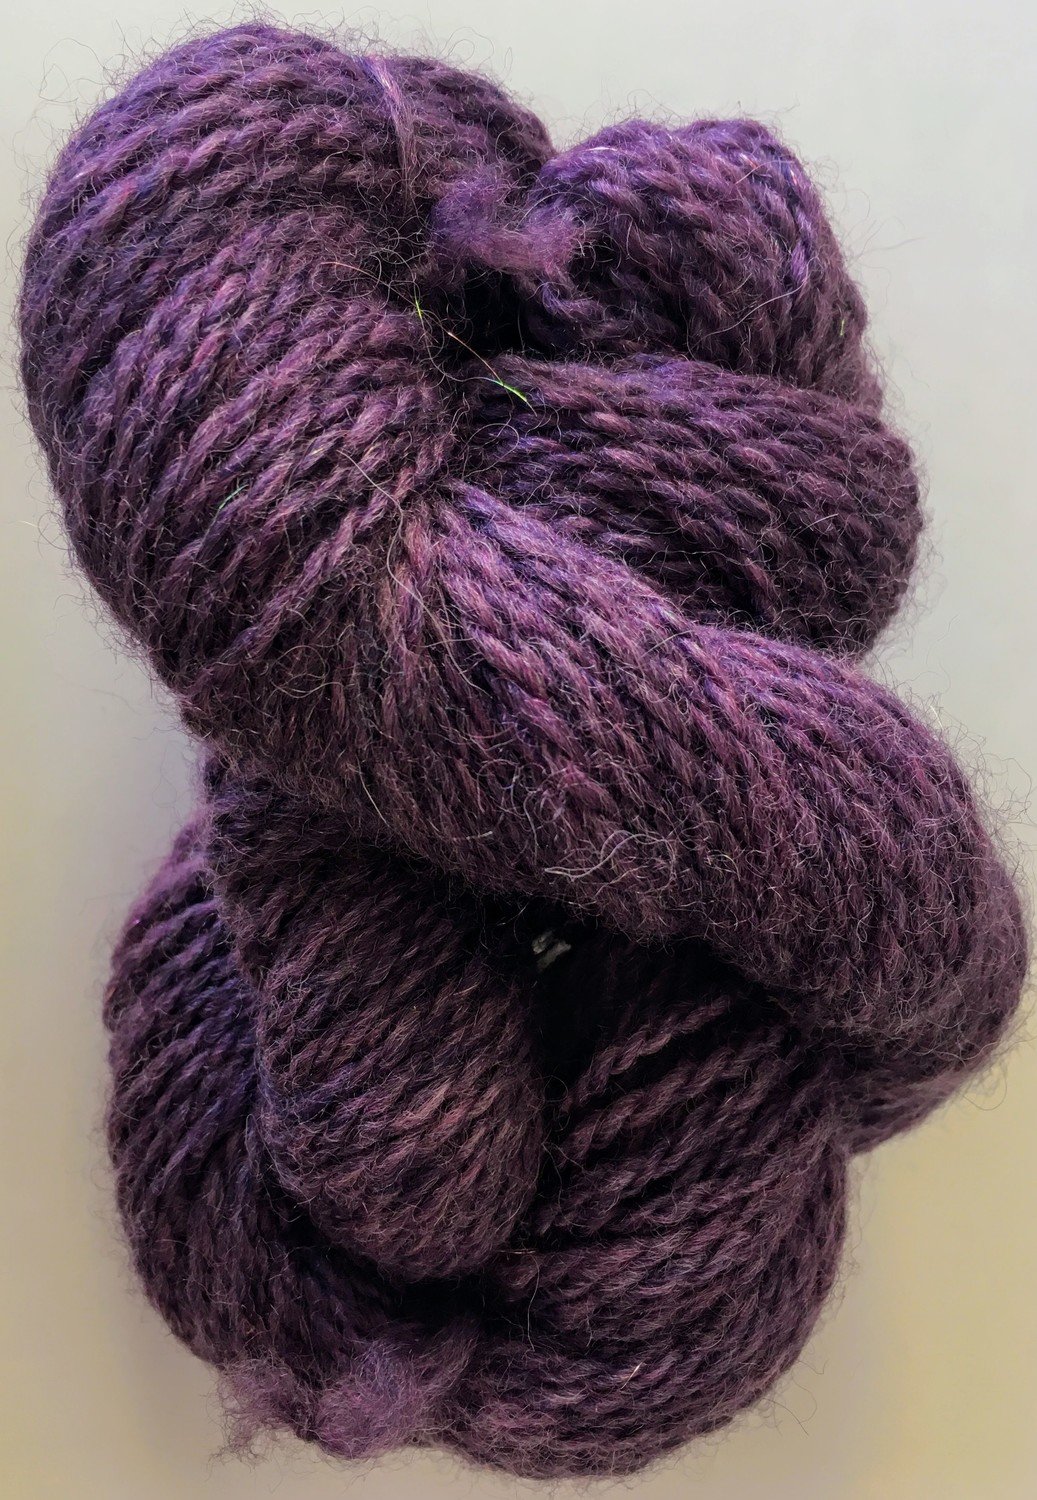 Breezy Hill Cottage-Milled, Hand-Dyed Yarn - Plum